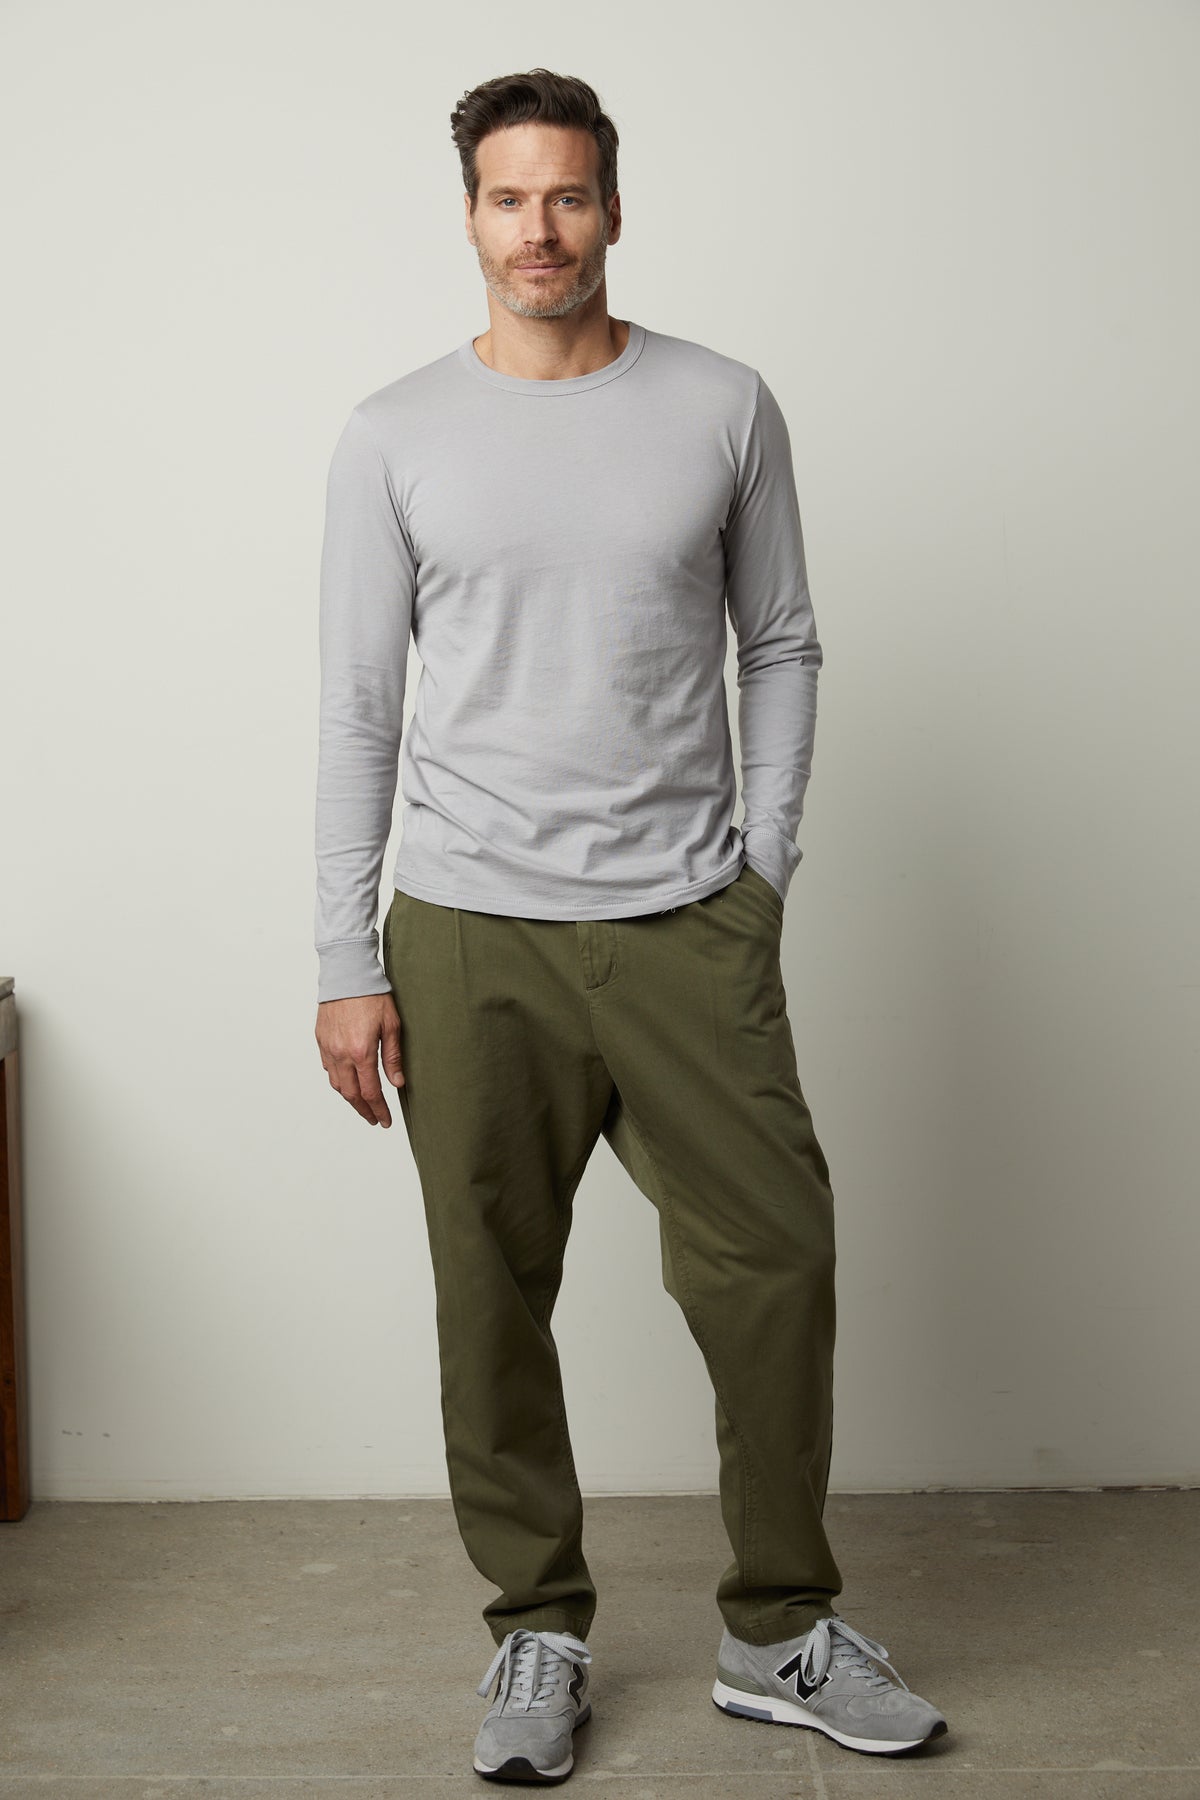 A man wearing a Velvet by Graham & Spencer grey long-sleeved STRAUSS CREW NECK TEE and khaki pants.-26846183129281